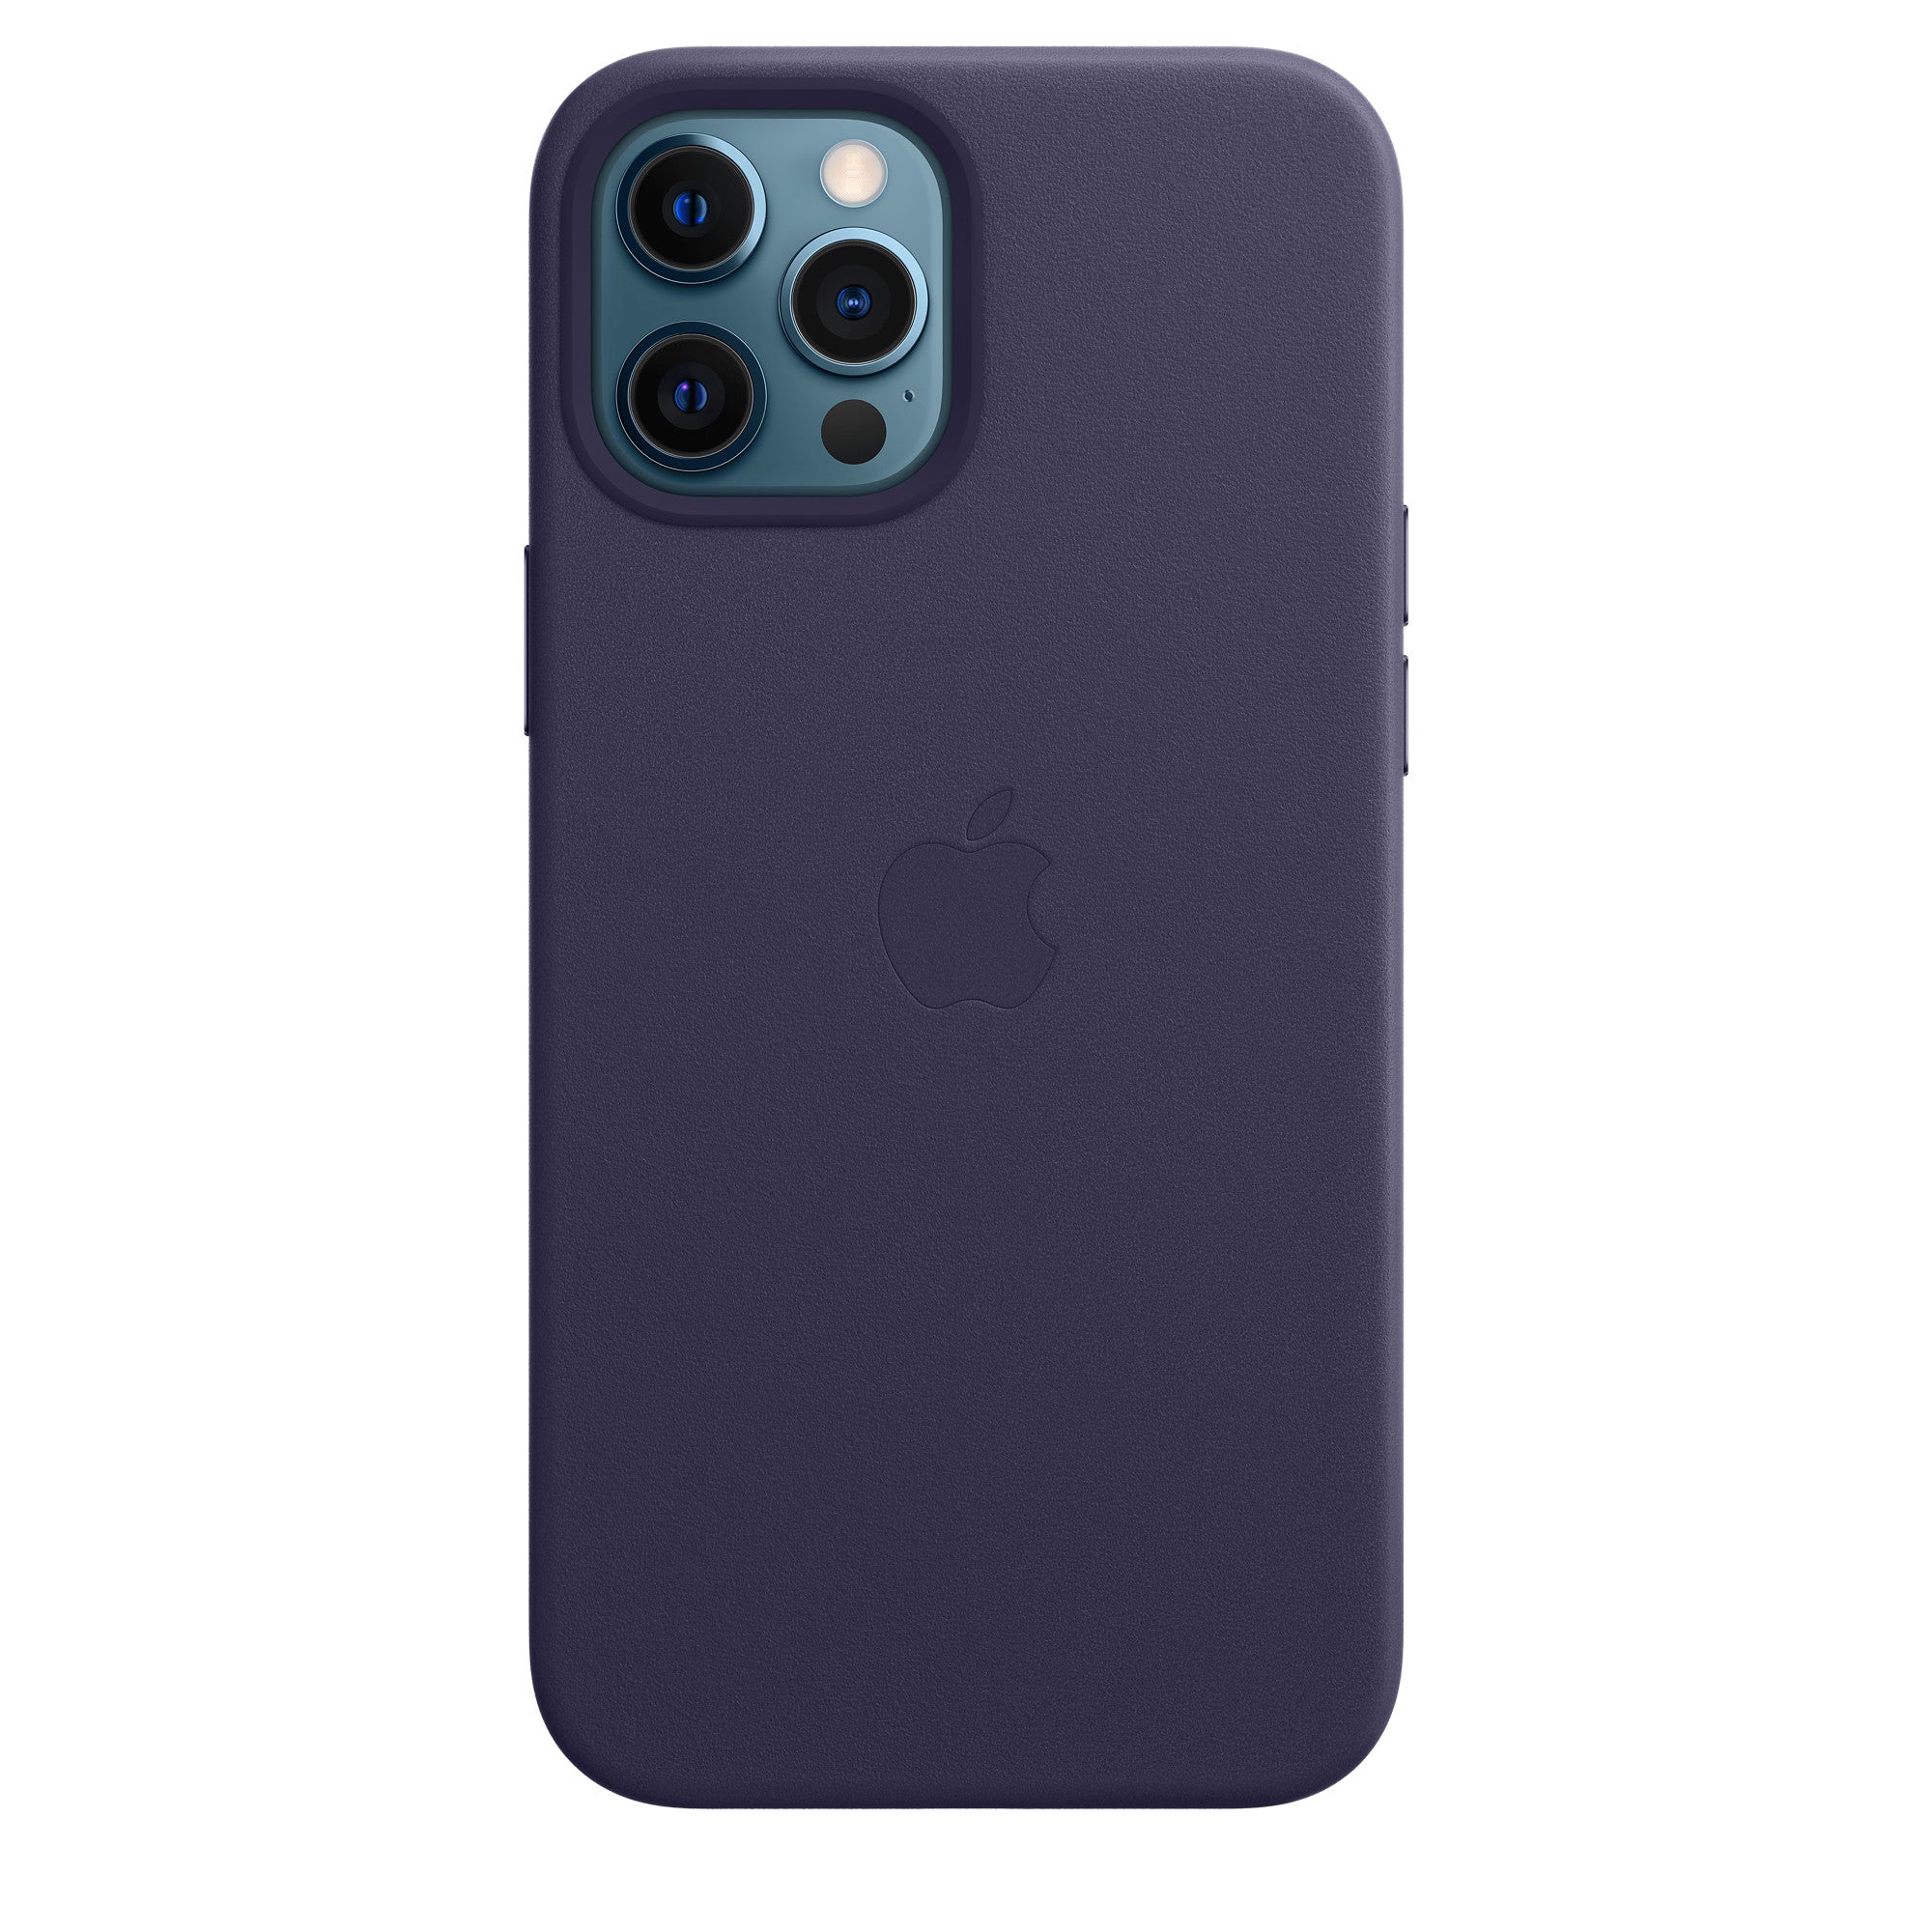 Apple iPhone 12 Pro Max Leather Case with MagSafe - Deep Violet Deep Violet New - Sealed